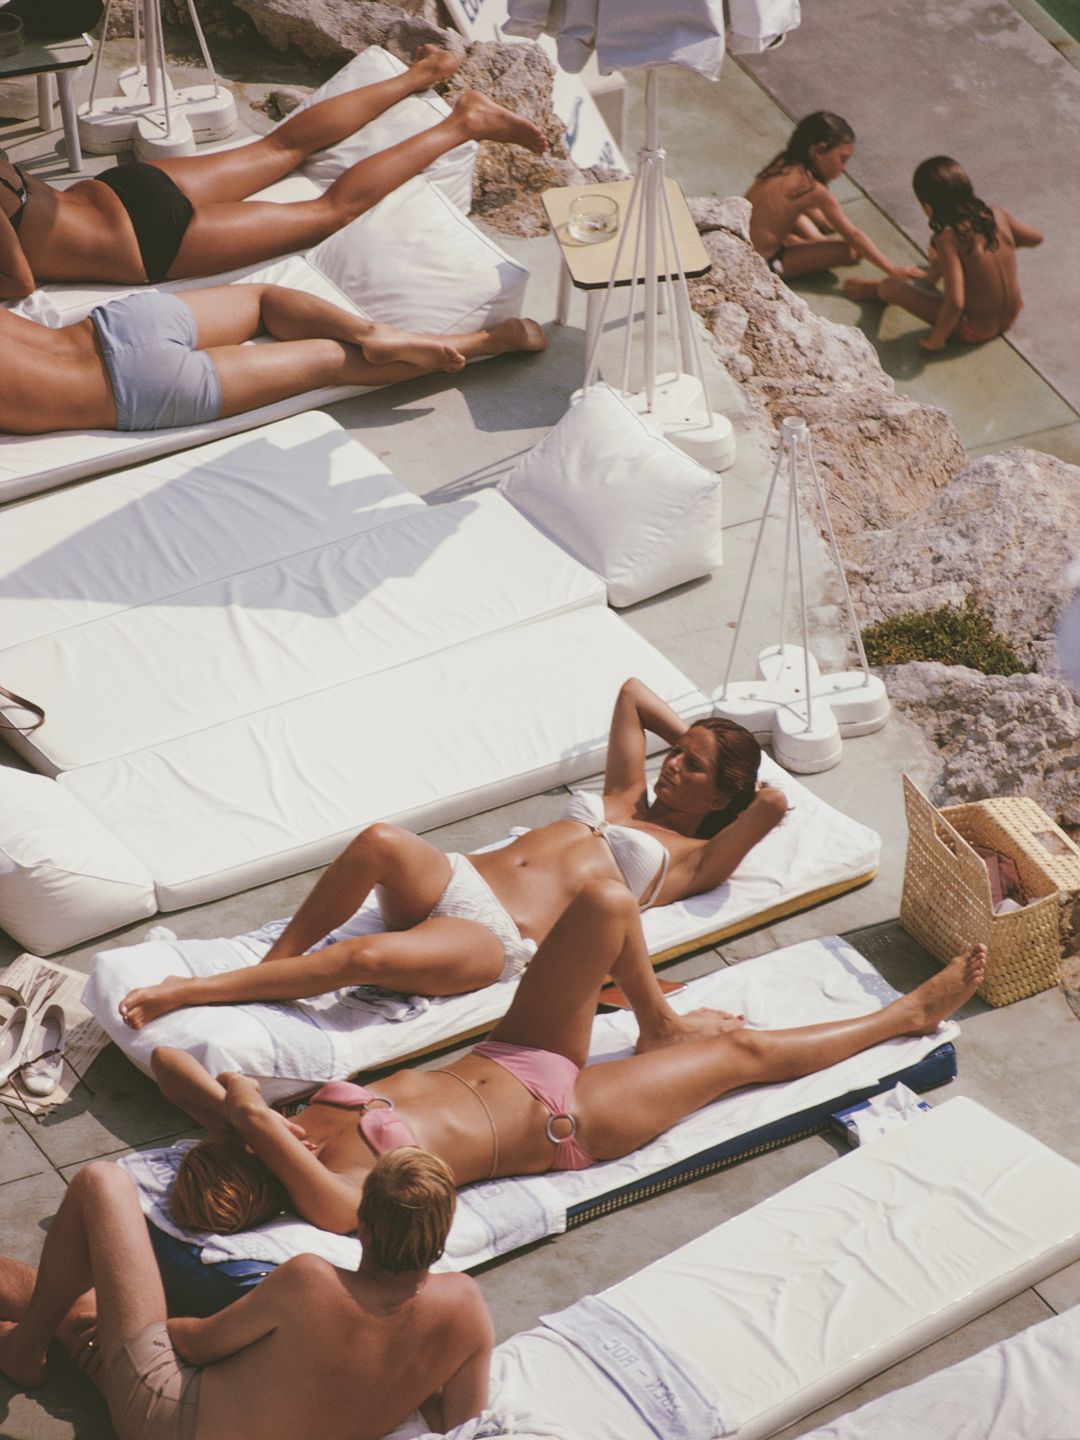 Sunbathers at the Hotel du Cap Eden-Roc, Antibes, France, August 1969. (Photo by Slim Aarons/Hulton Archive/Getty Images)